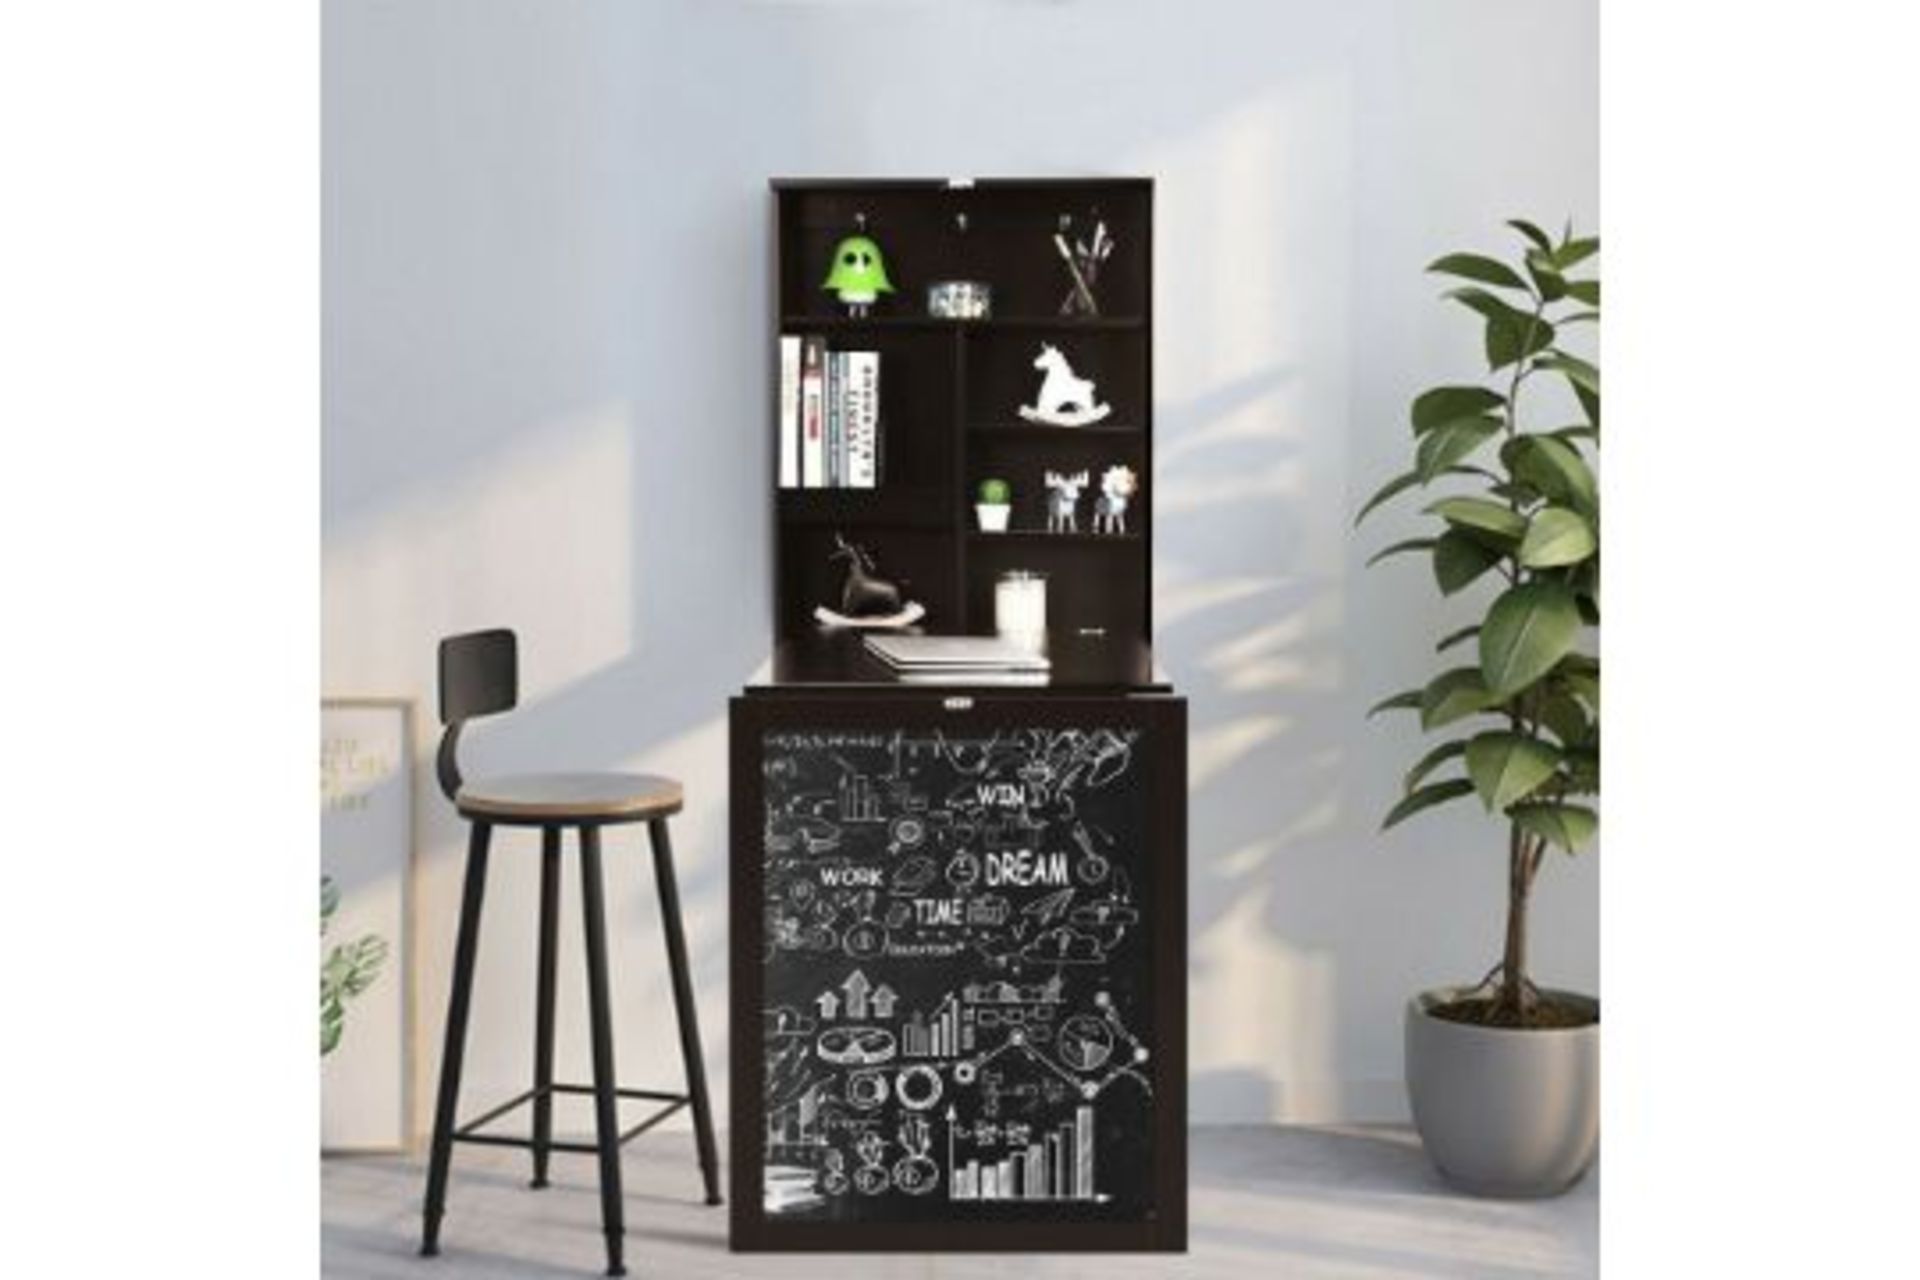 Convertible Wall Mounted Table With A Chalkboard-Coffee. - R14.5.